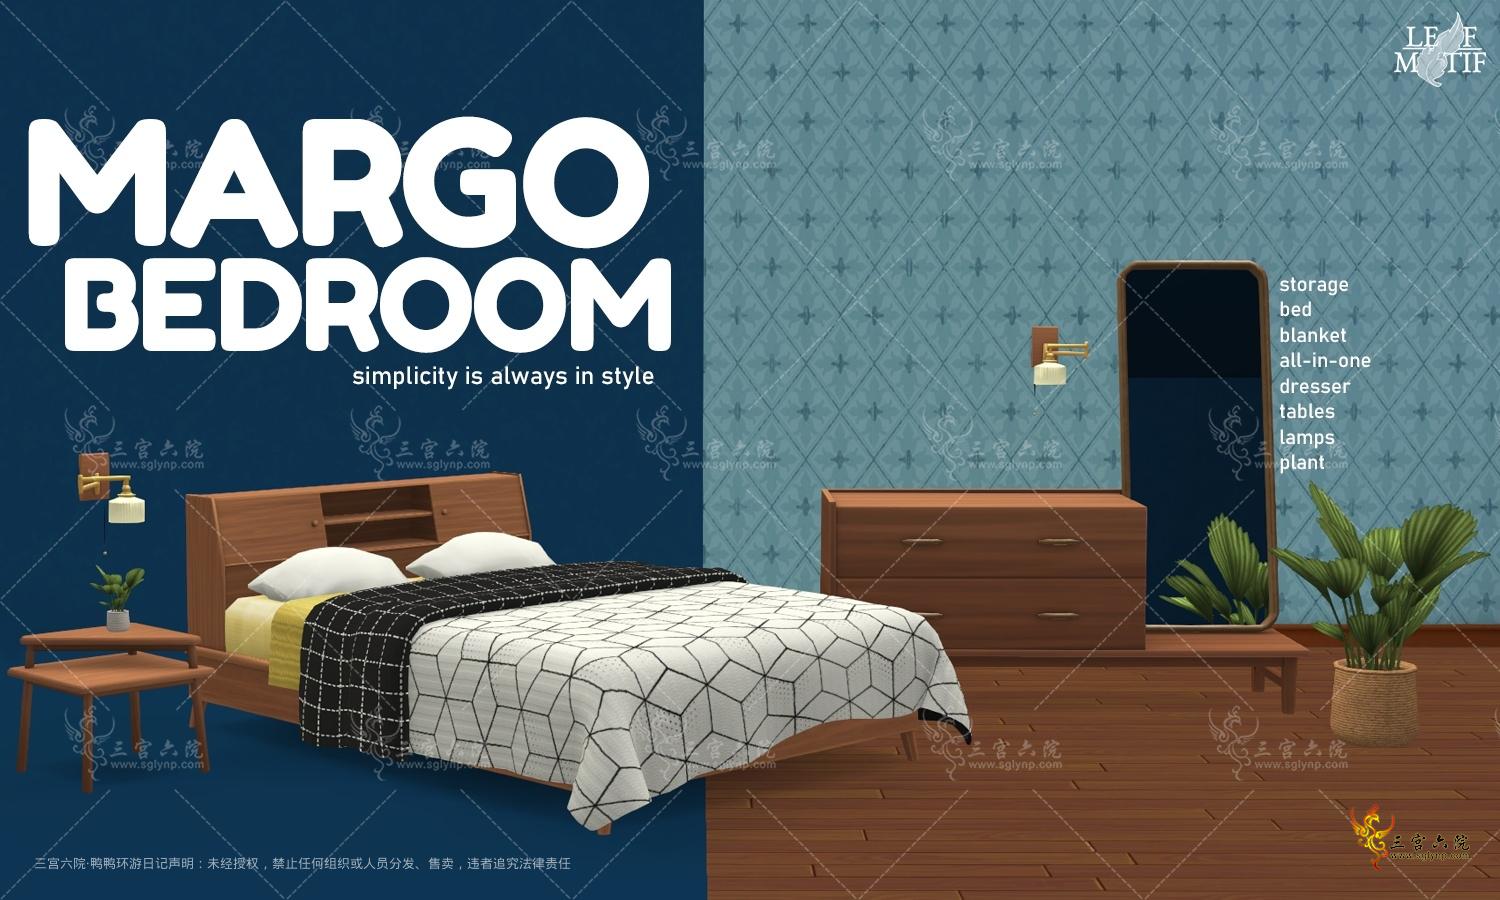 margobedroompreview1.png